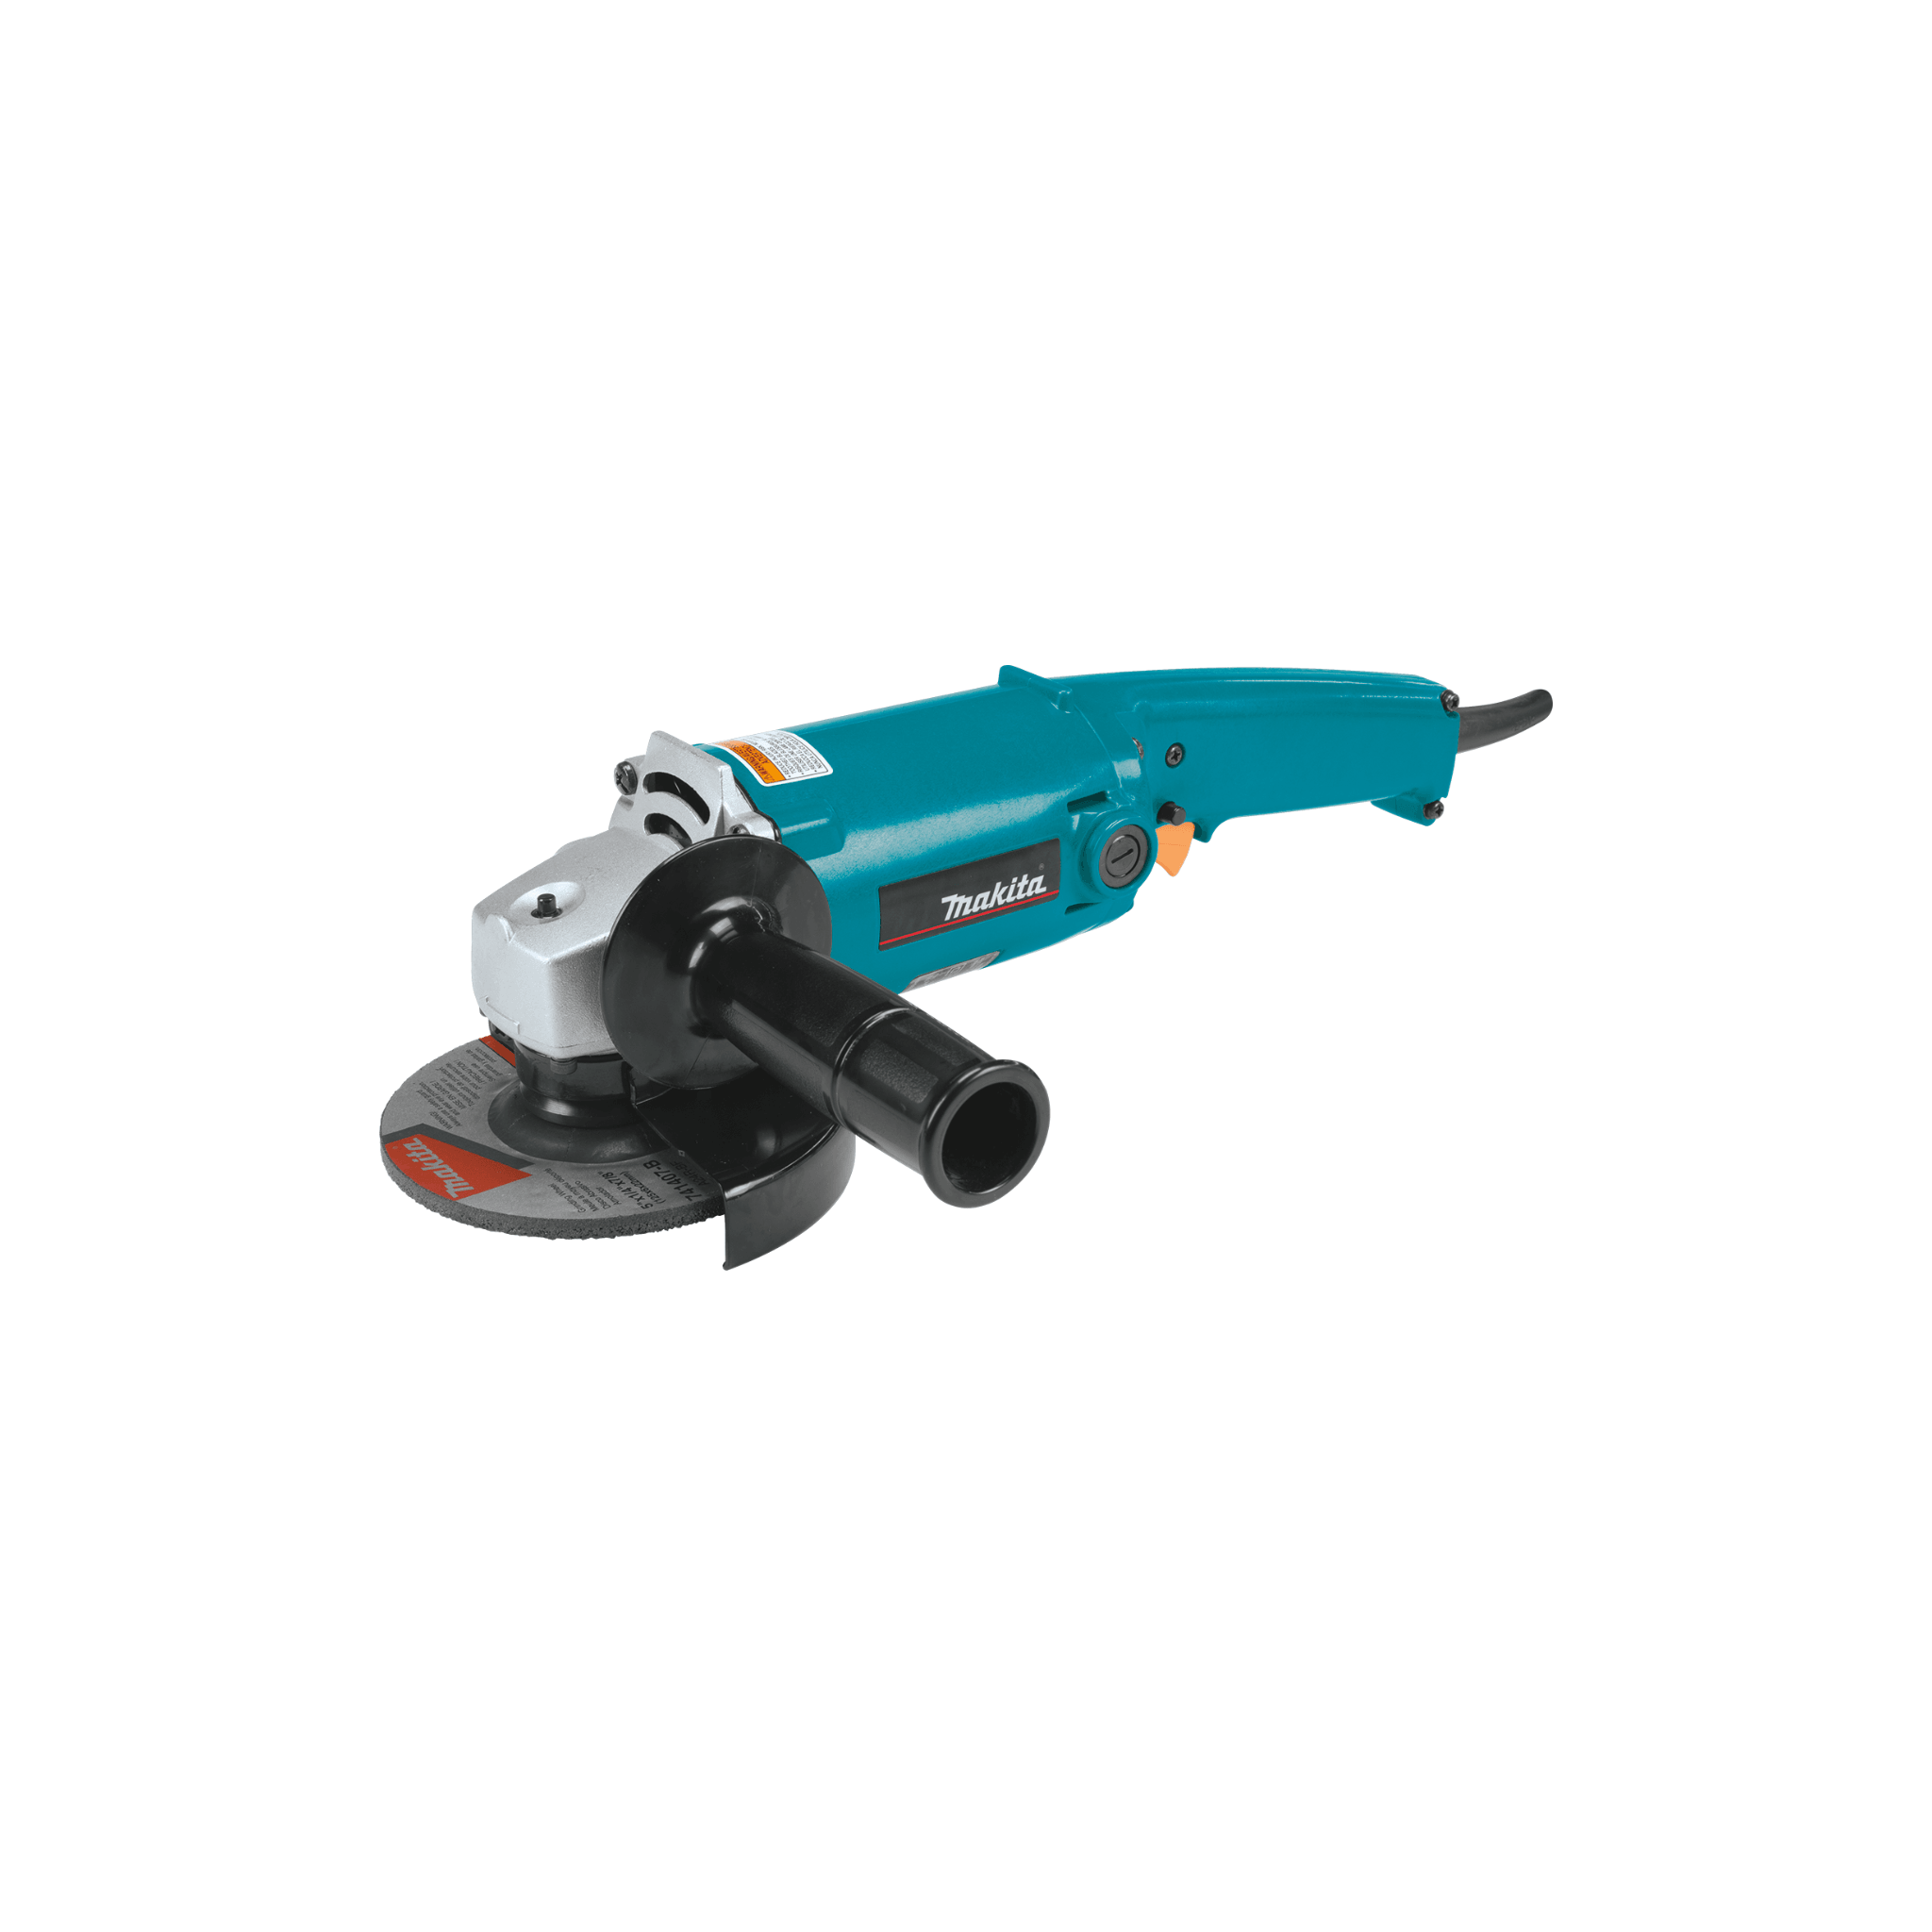 Makita 9005B 5" Angle Grinder, with AC/DC Switch - Direct Stone Tool Supply, Inc